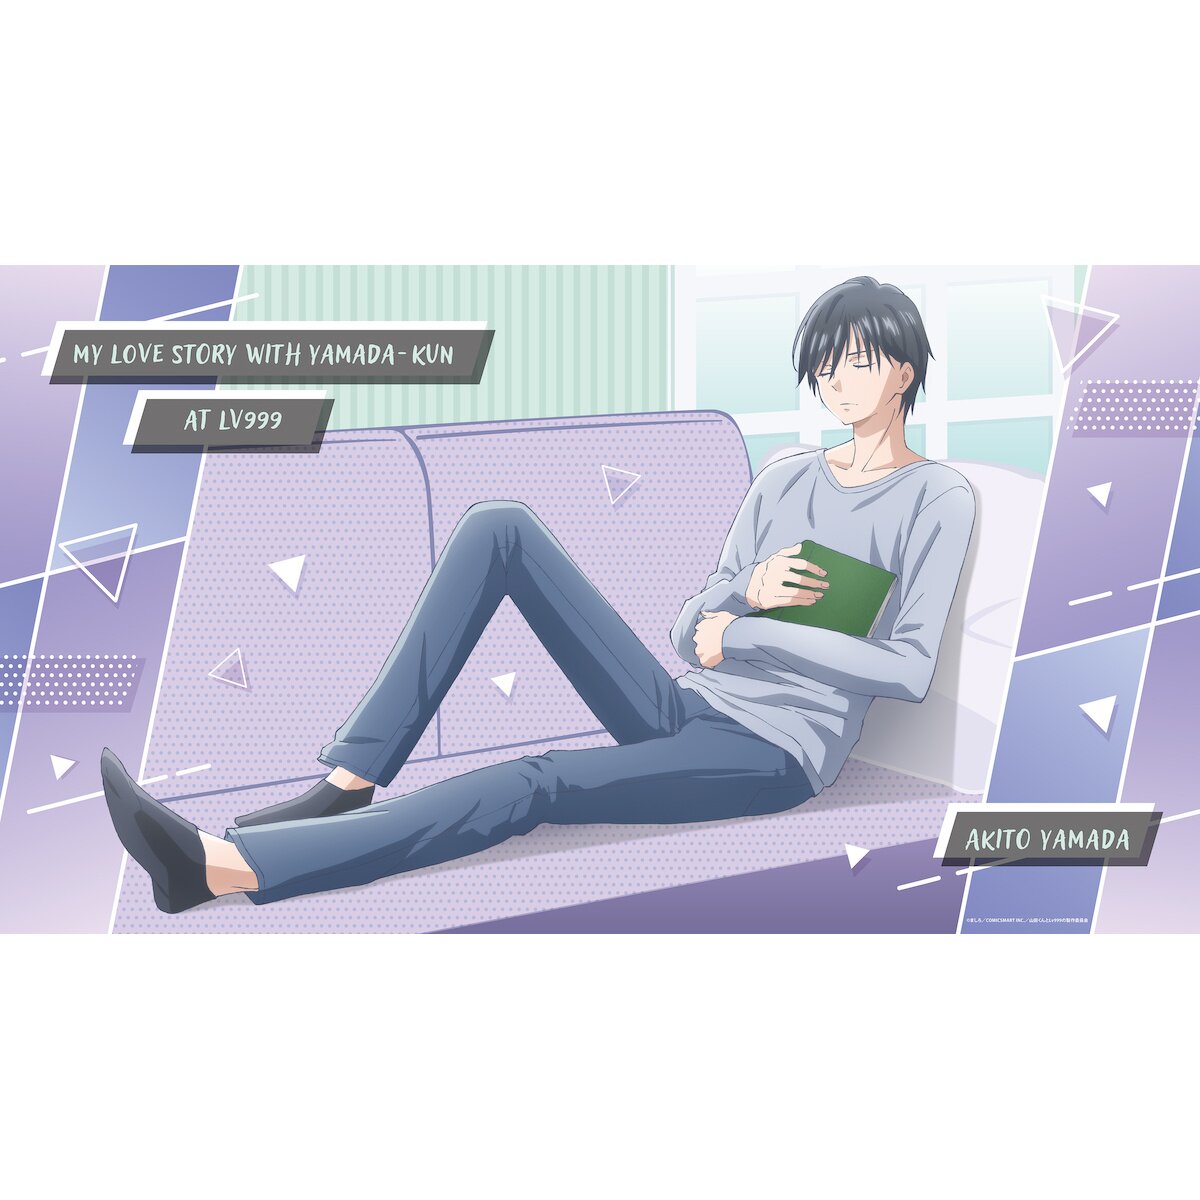  Anime Poster My Love Story with Yamada-kun at Lv999 Anime  Poster (5) Canvas Painting Wall Art Poster for Bedroom Living Room Decor  24x36inch(60x90cm) Frame-style: Posters & Prints